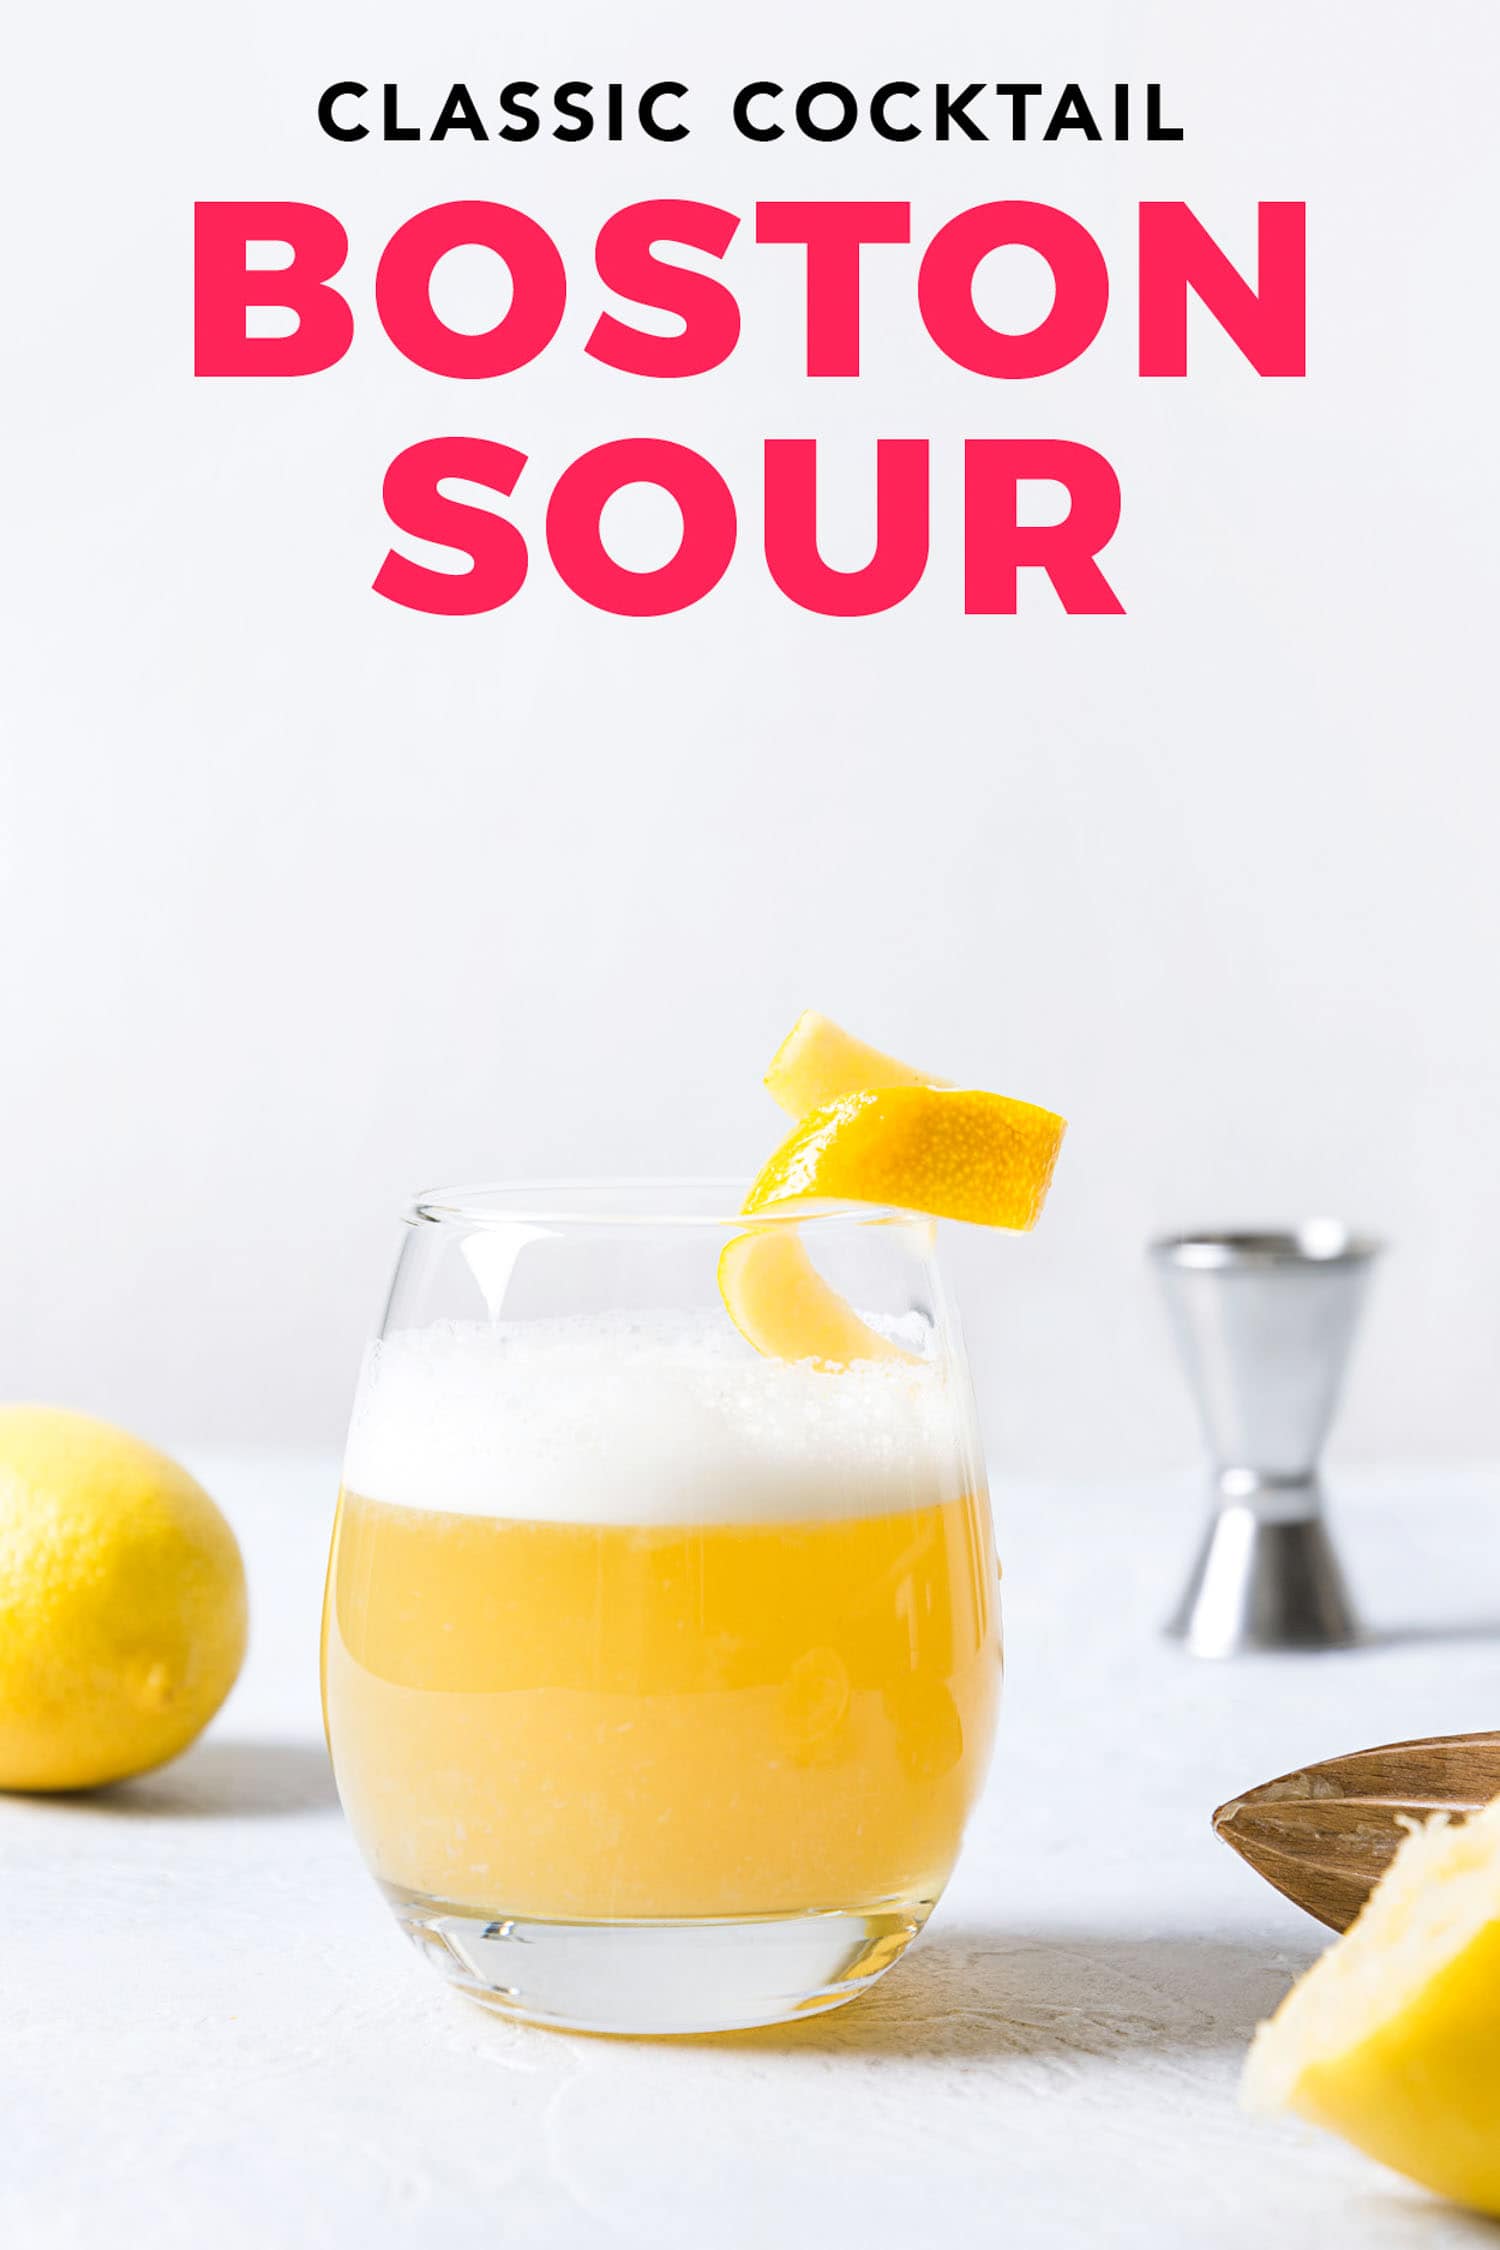 Boston sour cocktail - bourbon with lemon juice, sugar syrup and egg white in glass. Vertical orientation.